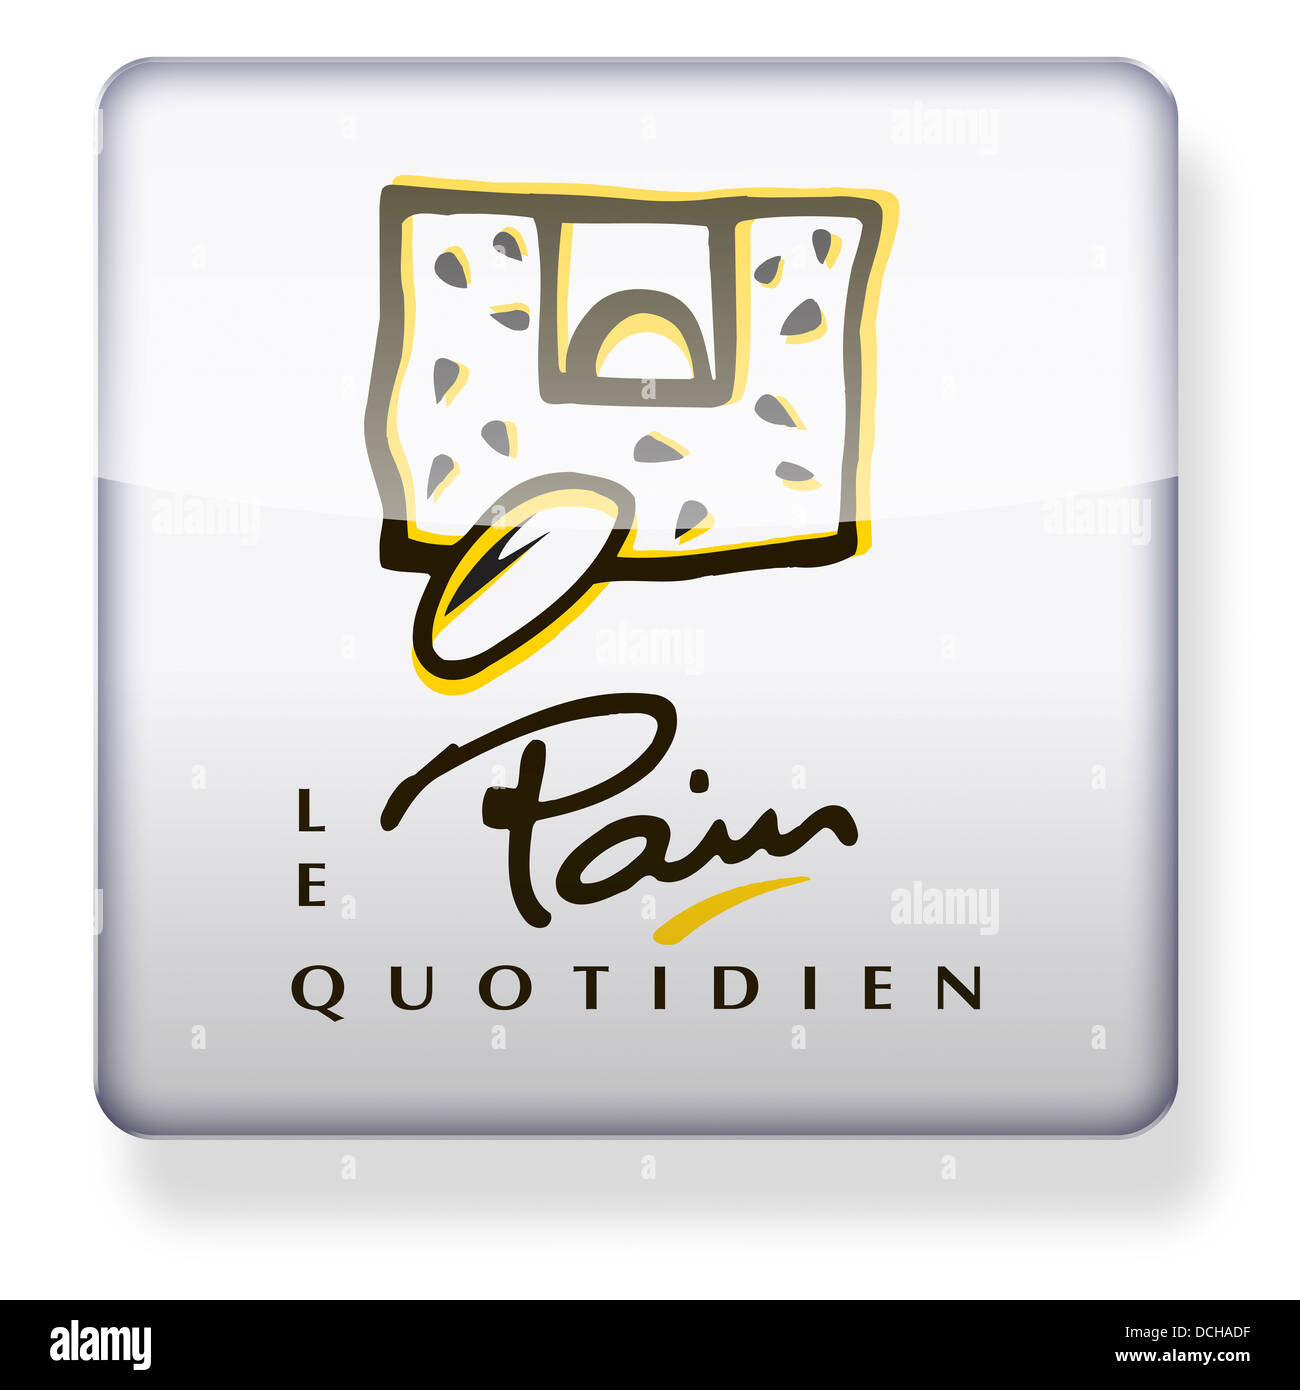 Le Pain Quotidien logo as an app icon. Clipping path included. Stock Photo